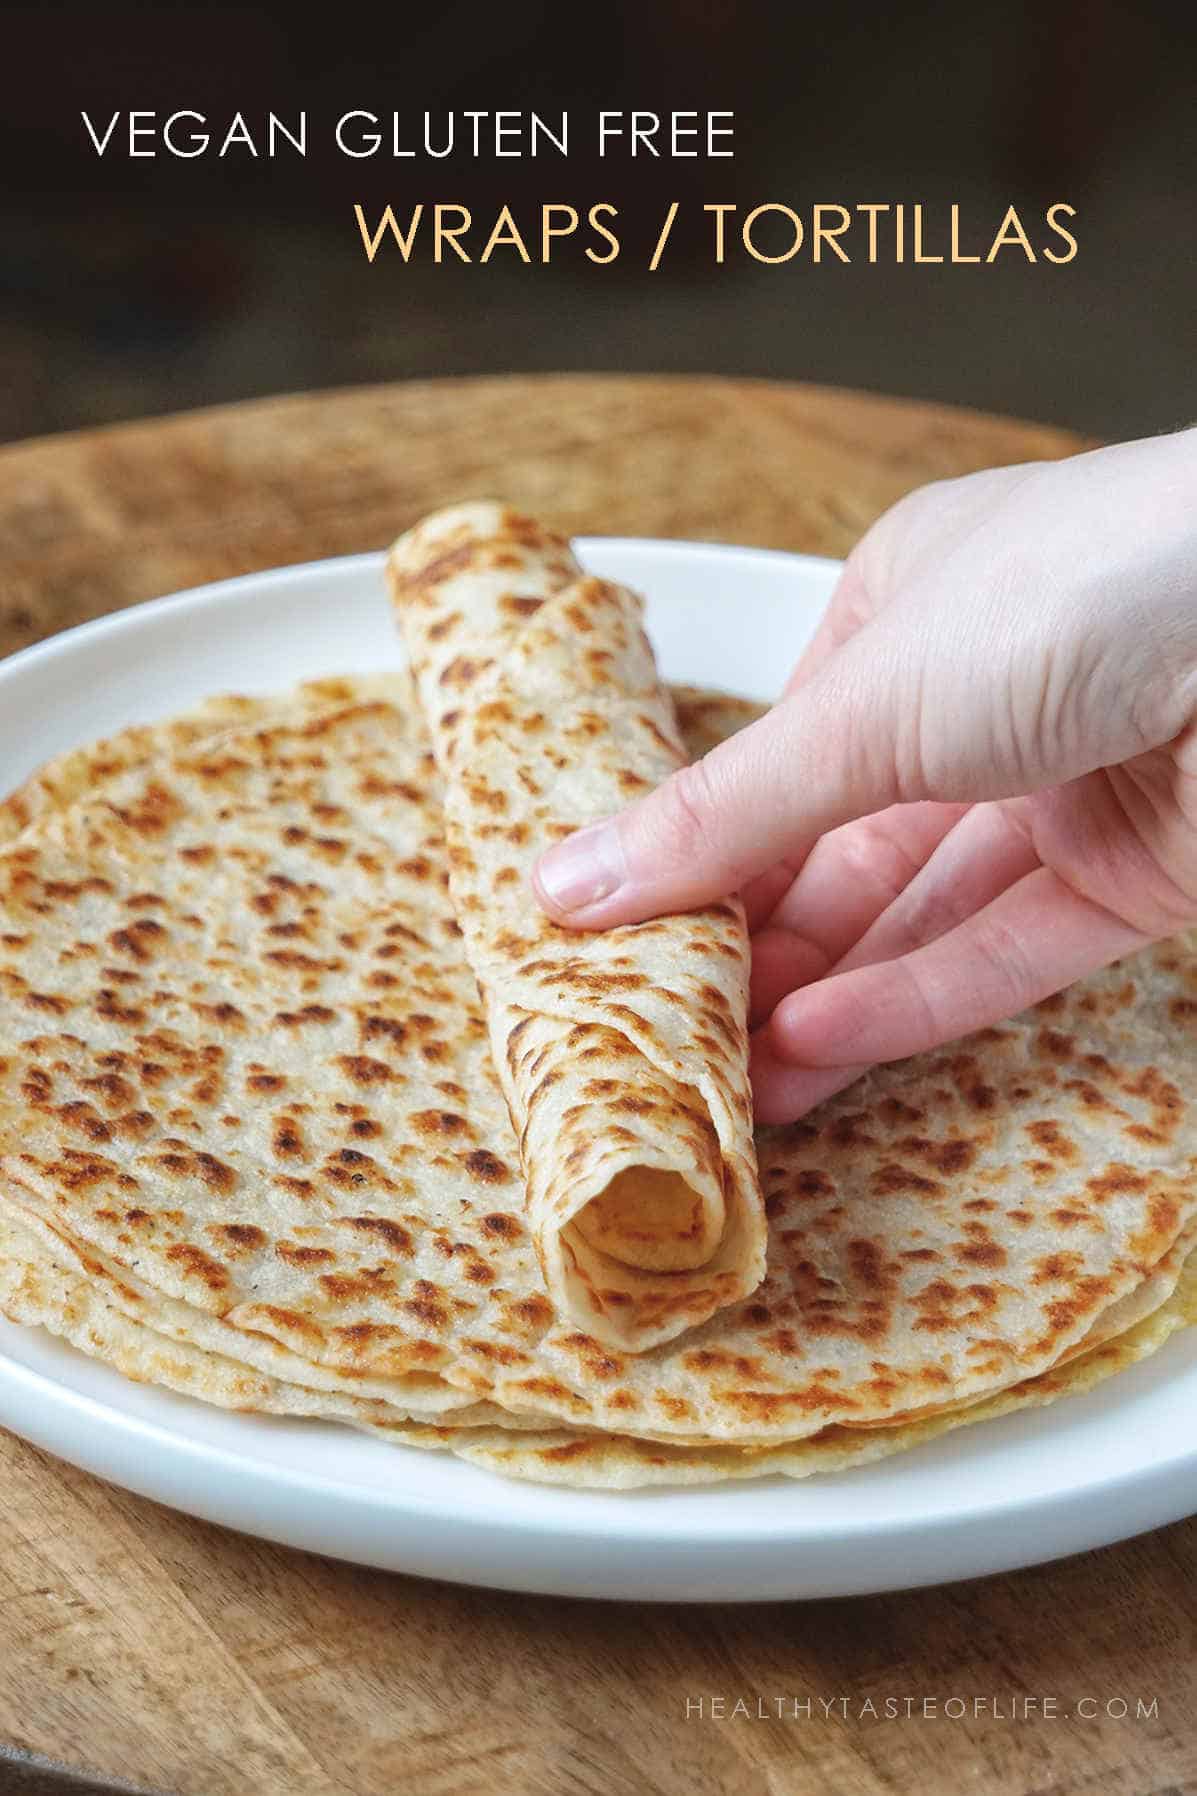 Gluten free potato tortillas. These gluten free tortillas wraps are very thin, chewy and flexible: the softest vegan gluten free potato tortillas you can make at home! These homemade gluten free tortillas wraps are so tasty, tender and pliable, you’ll never use store-bought again. #glutenfreetortillas #veganwraps 